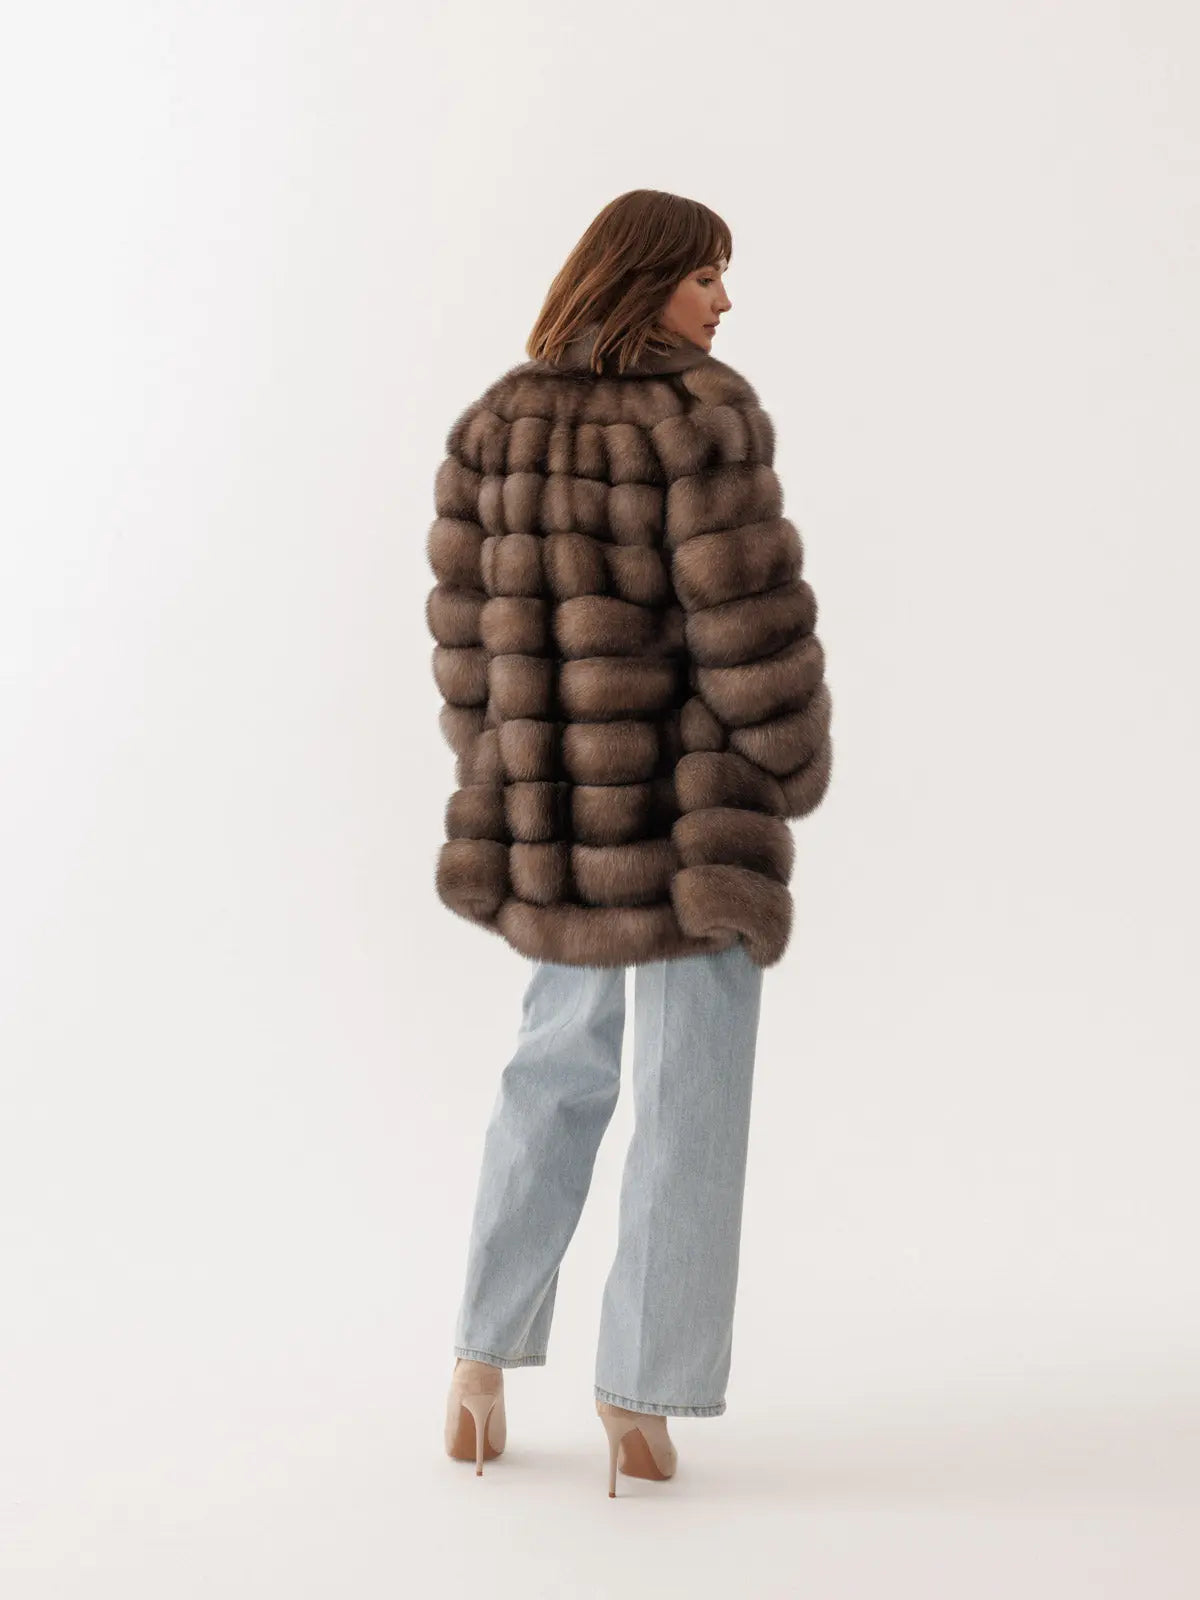 Sable coat with a stand-up collar in Desert Ice color